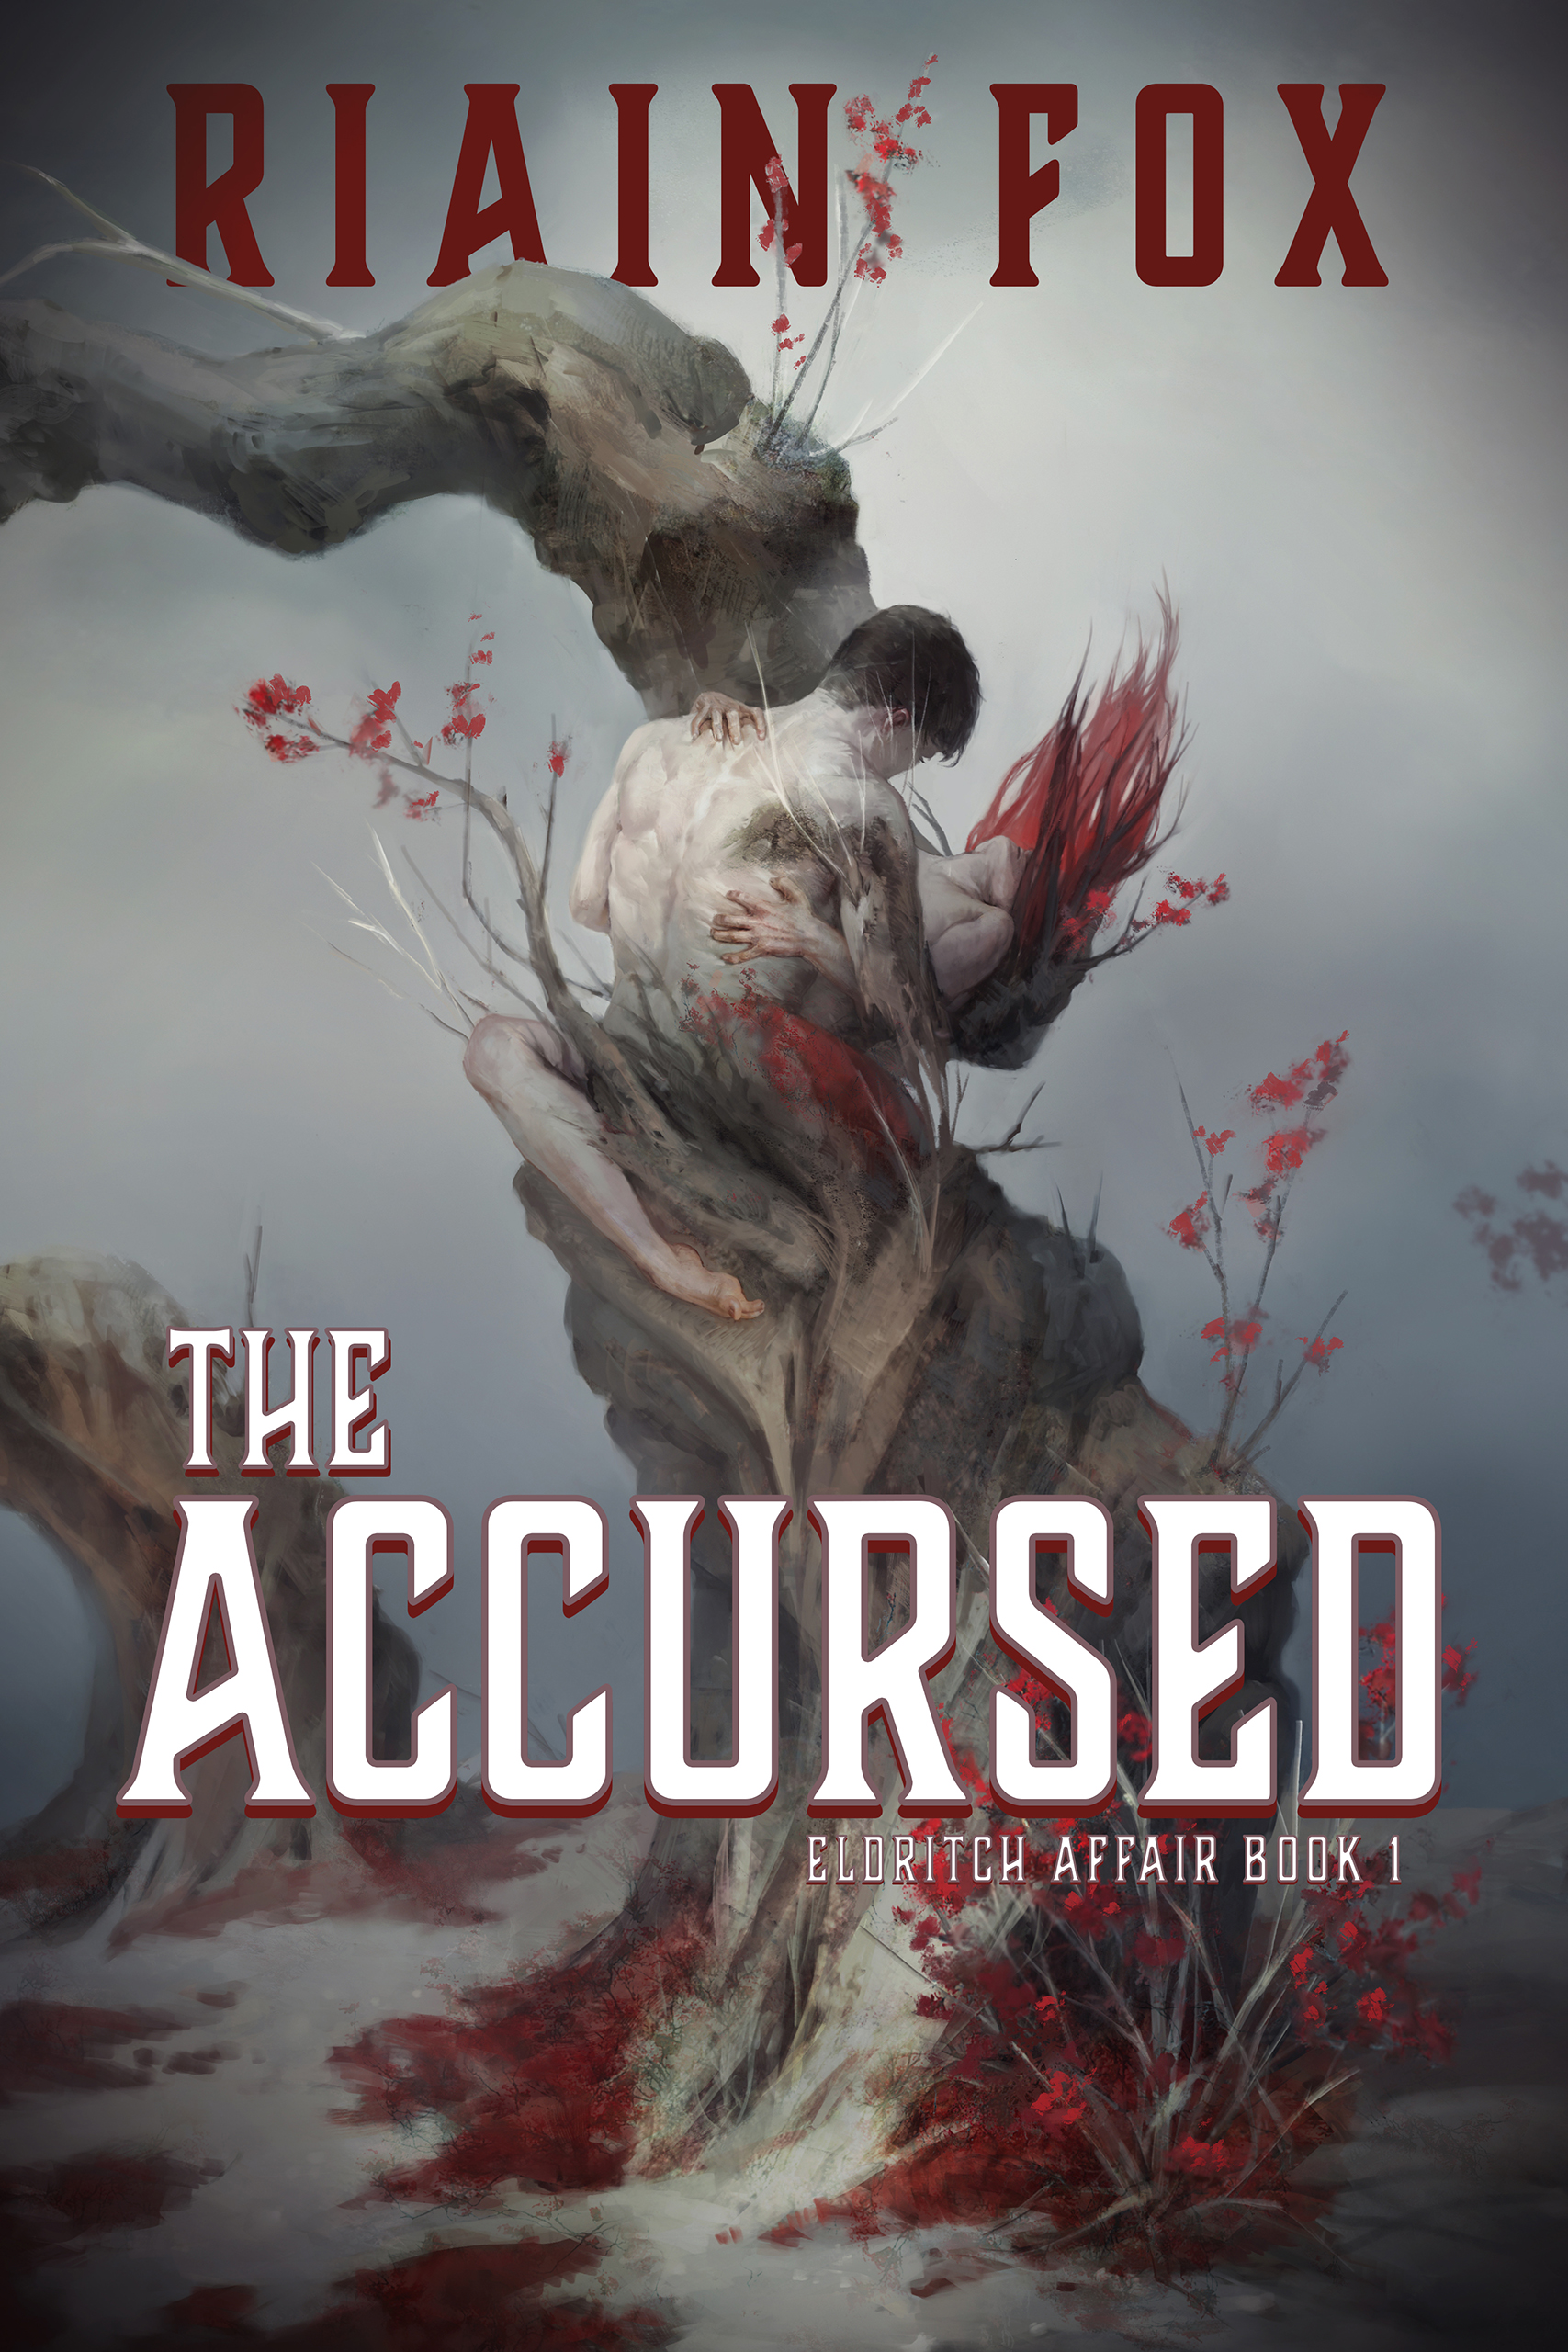 The Accursed Ebook cover. A couple embracing and turning into a tree